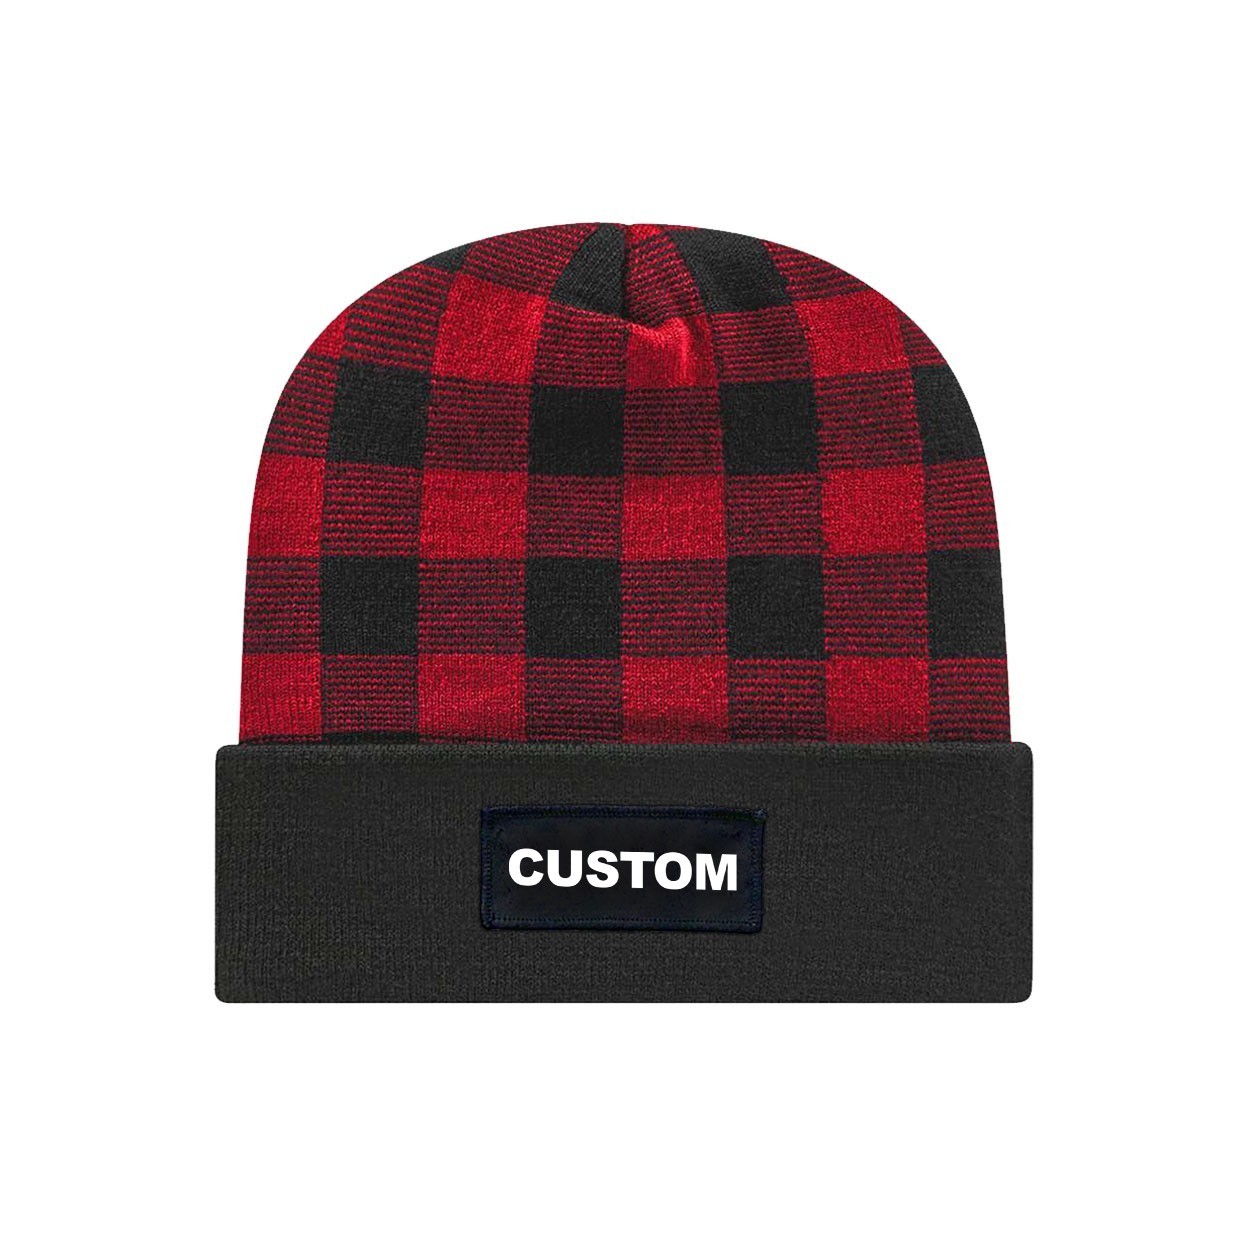 Custom Life Brand Logo Night Out Woven Patch Roll Up Plaid Beanie Black/True Red (White Logo)